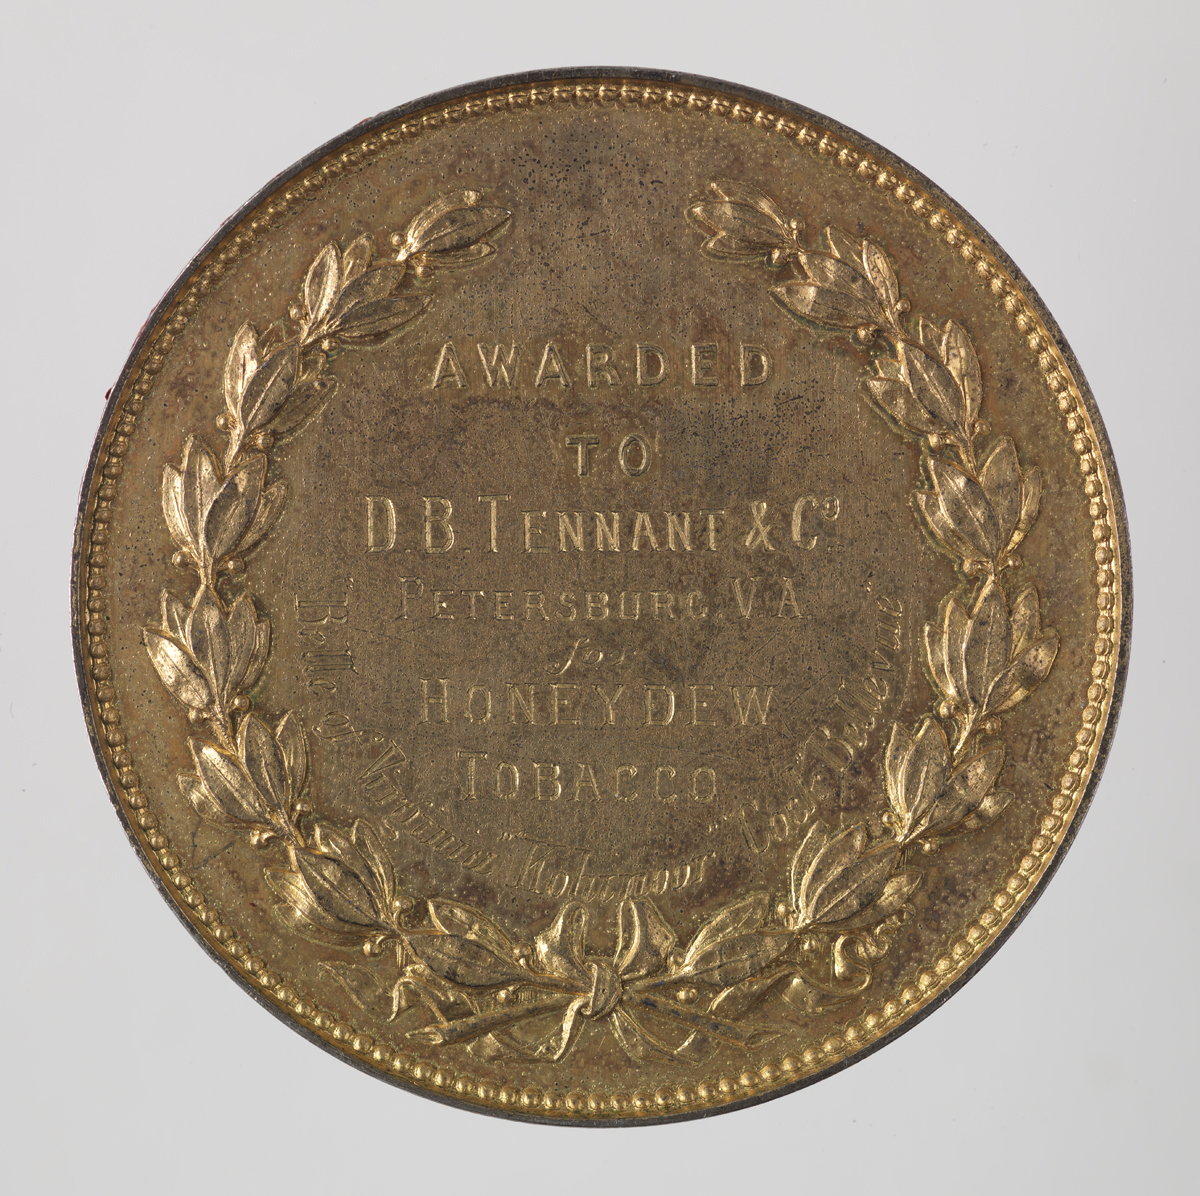 Gold Medal (Back) awarded to D.B. Tenant & Co. at the Calcutta International Exhibition, 1883-1884